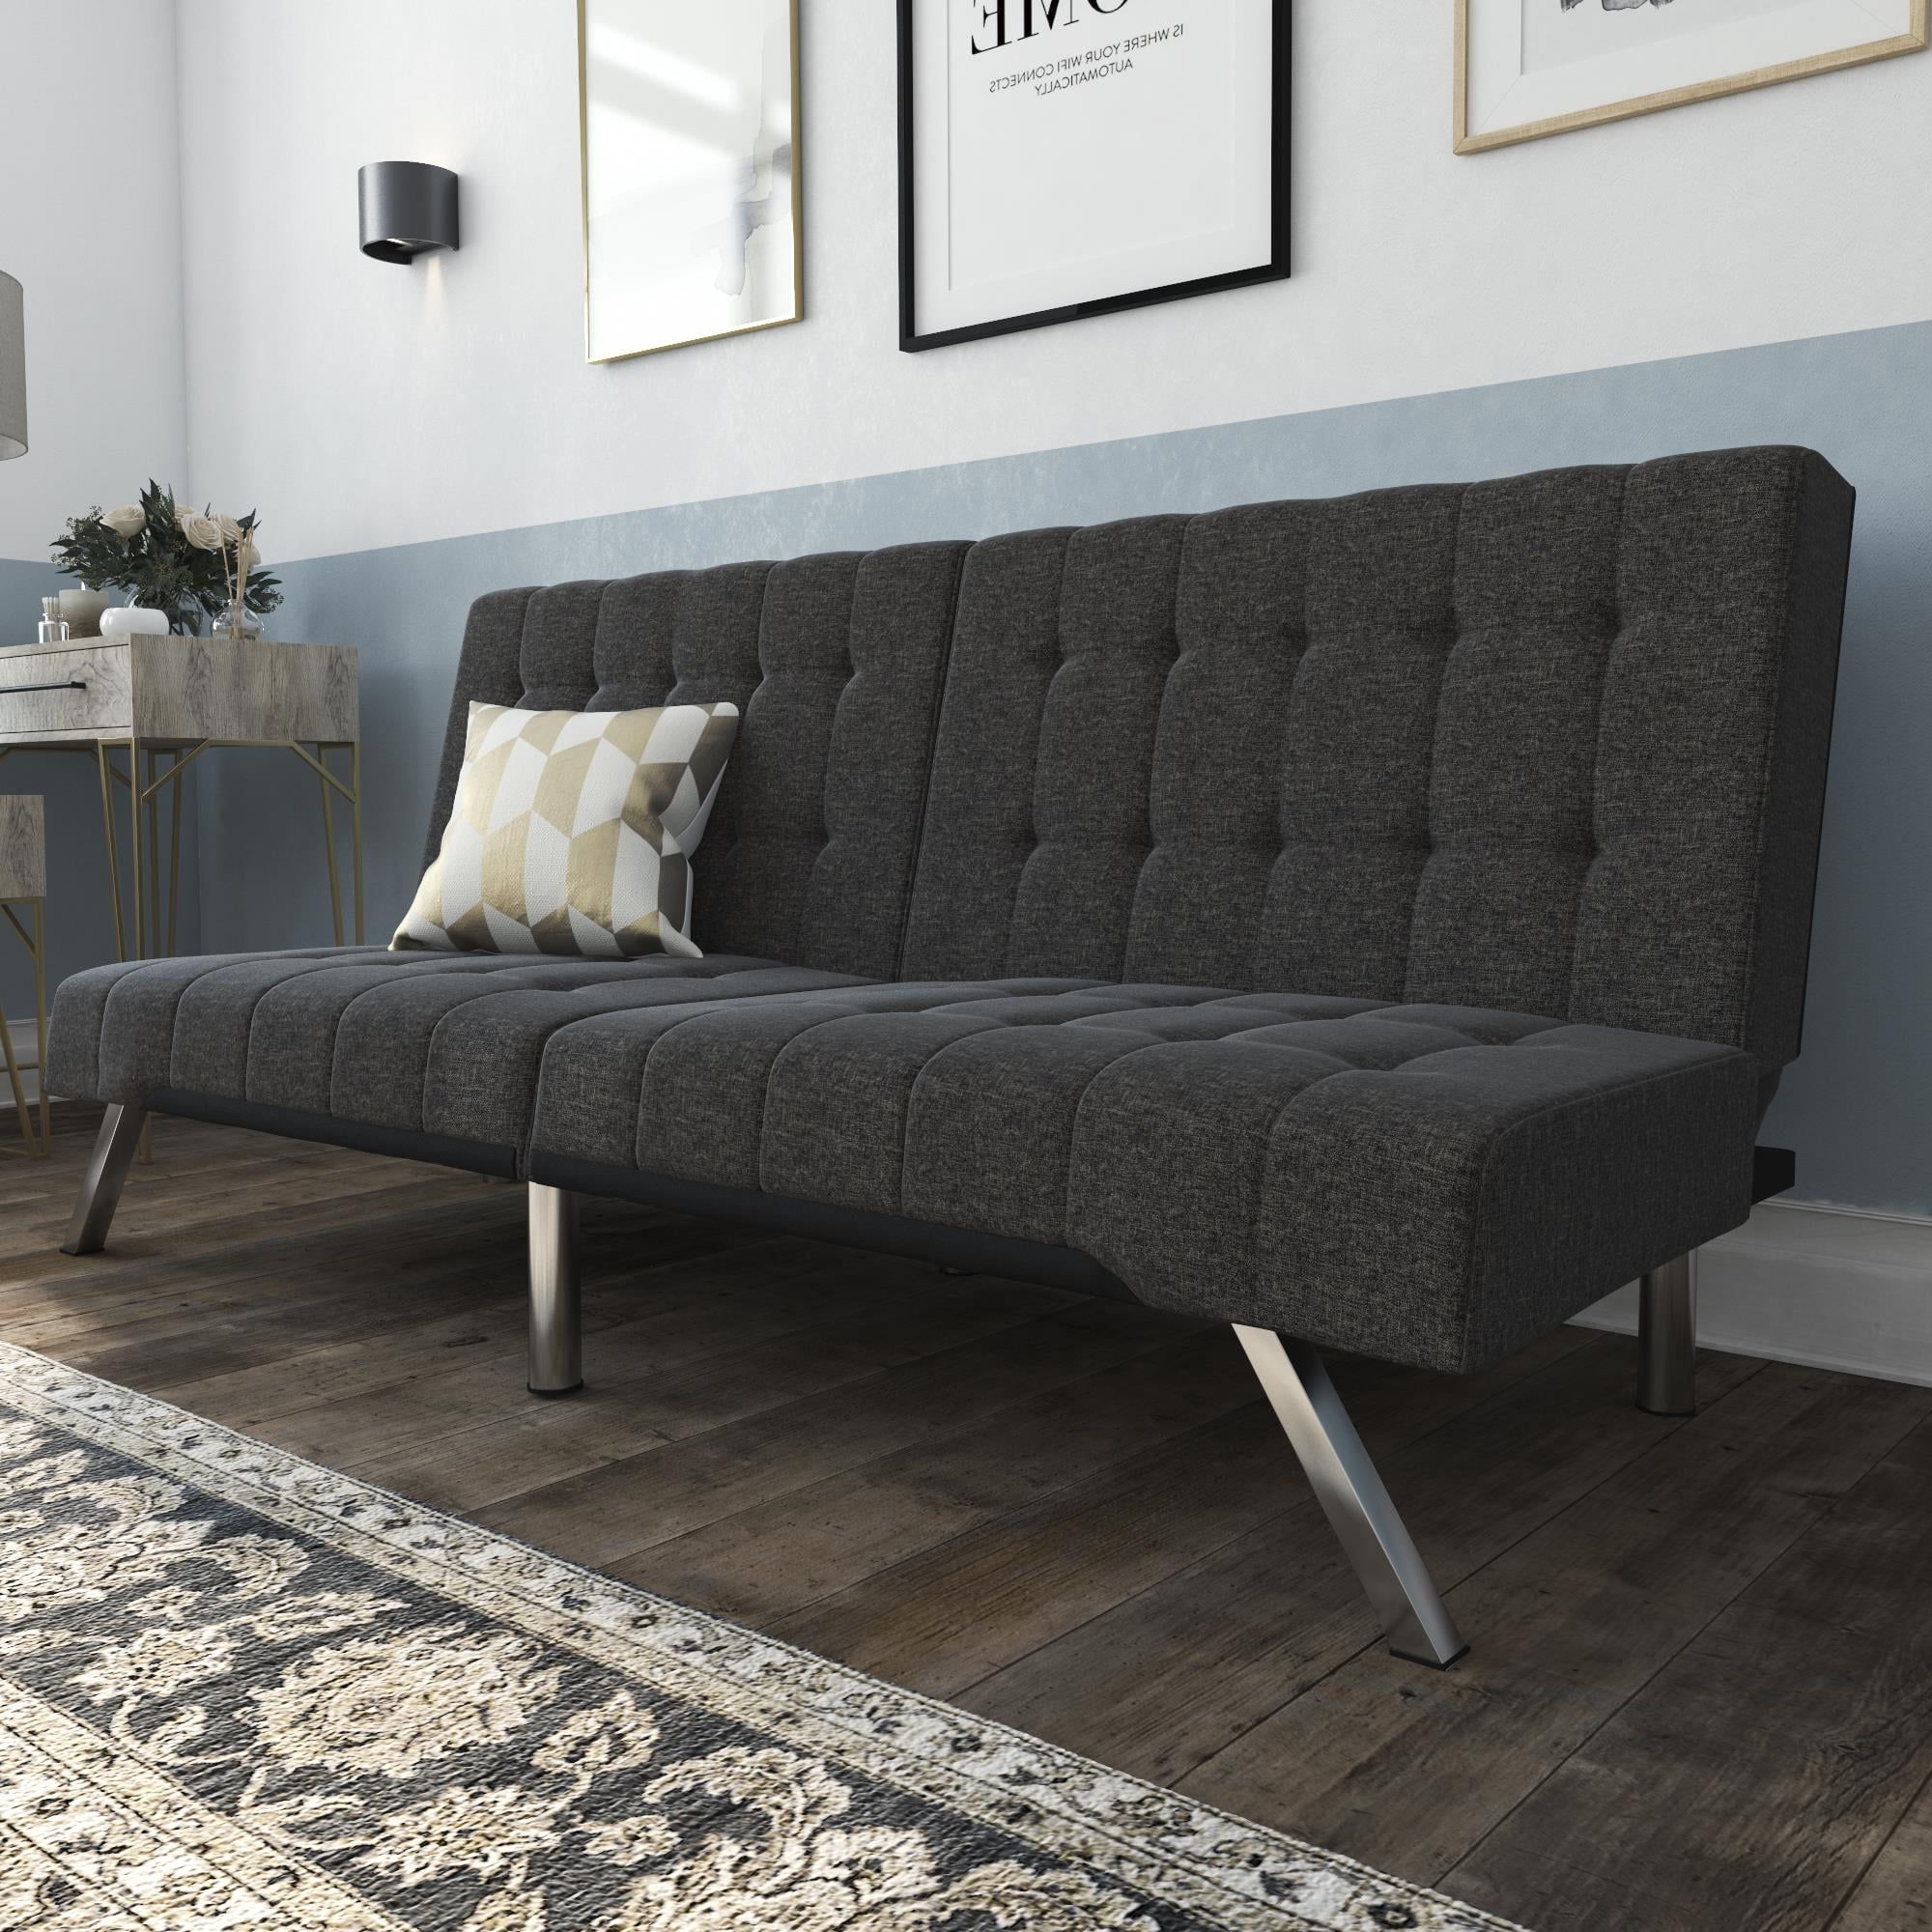 Most Recently Released Convertible Gray Loveseat Sleepers Inside Futons, Frames & Covers Tufted Convertible Gray Linen Futon Sofa Bed (View 10 of 15)